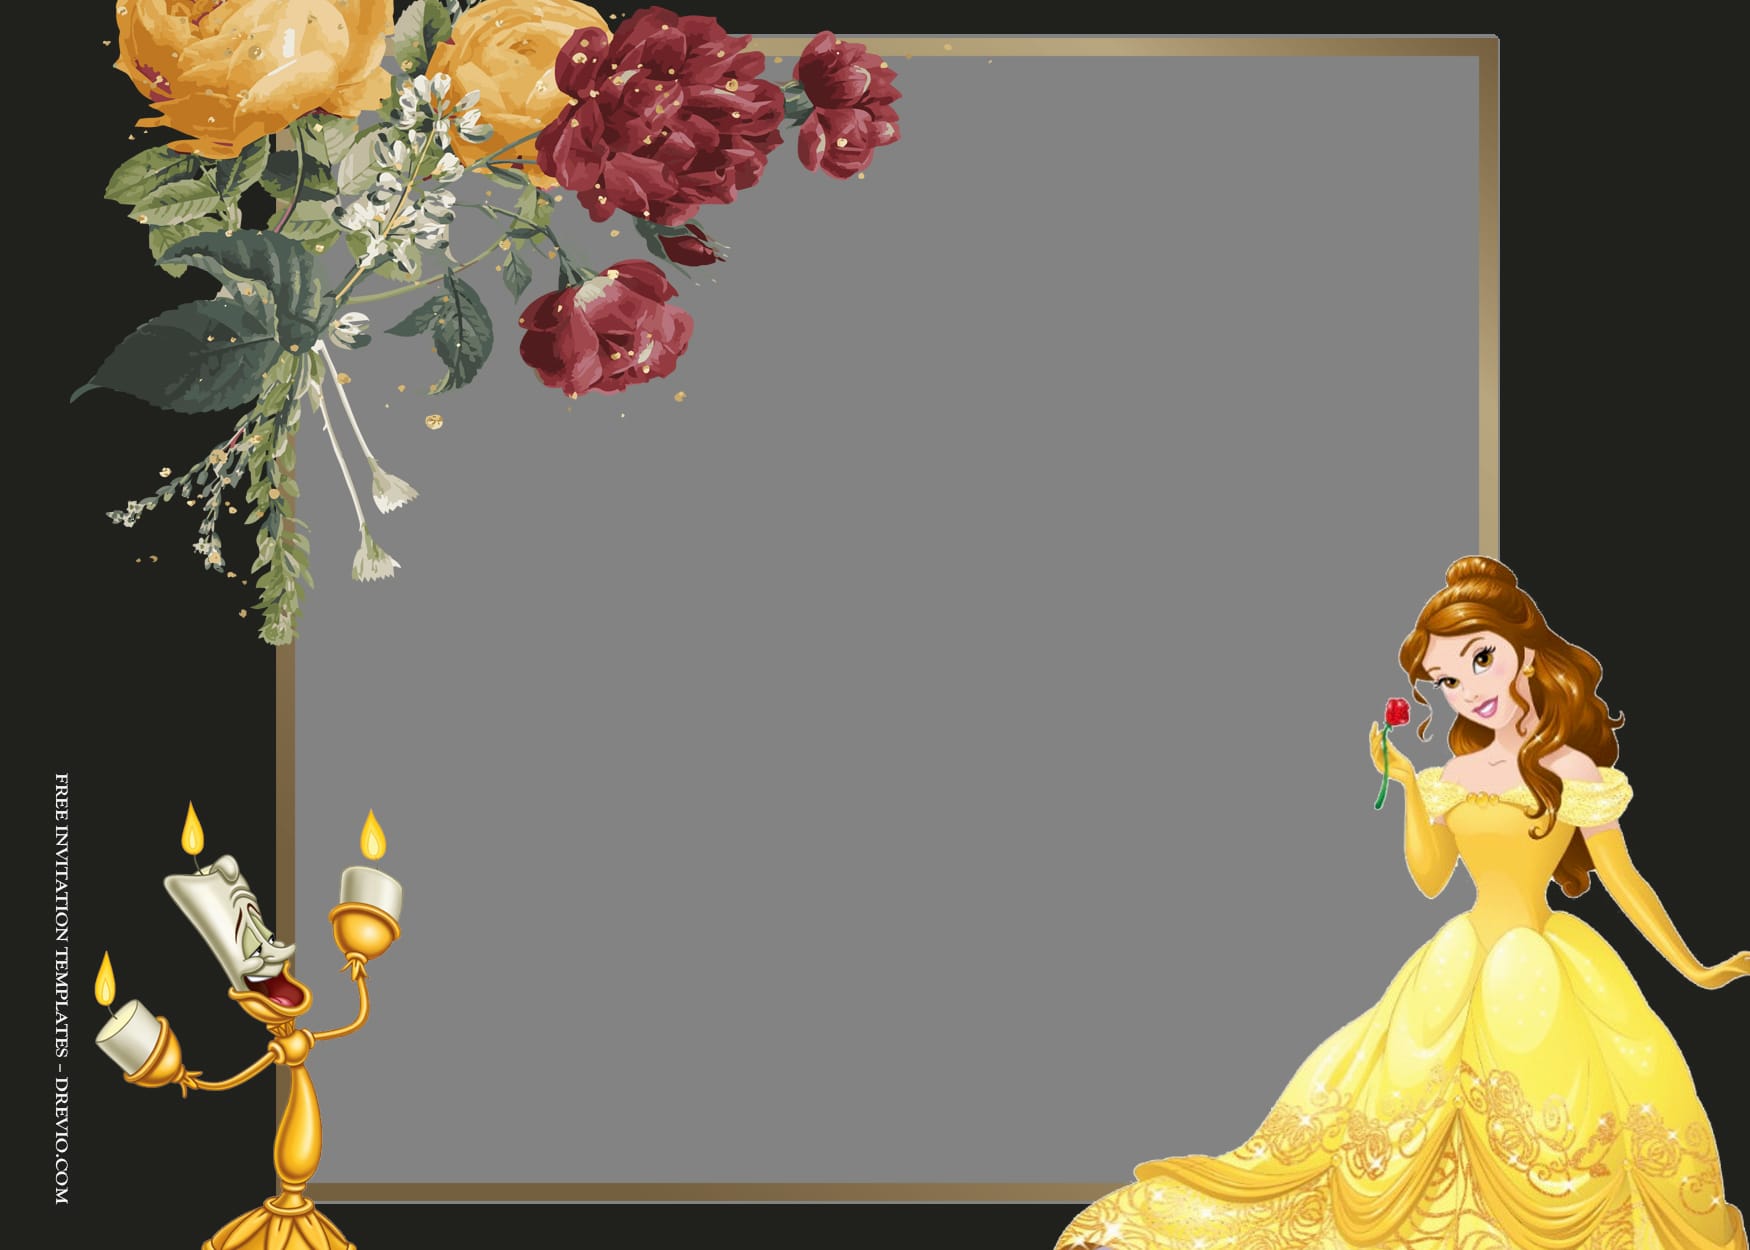 7+ Light Off Floral Princess Belle Birthday Invitation Templates Type One